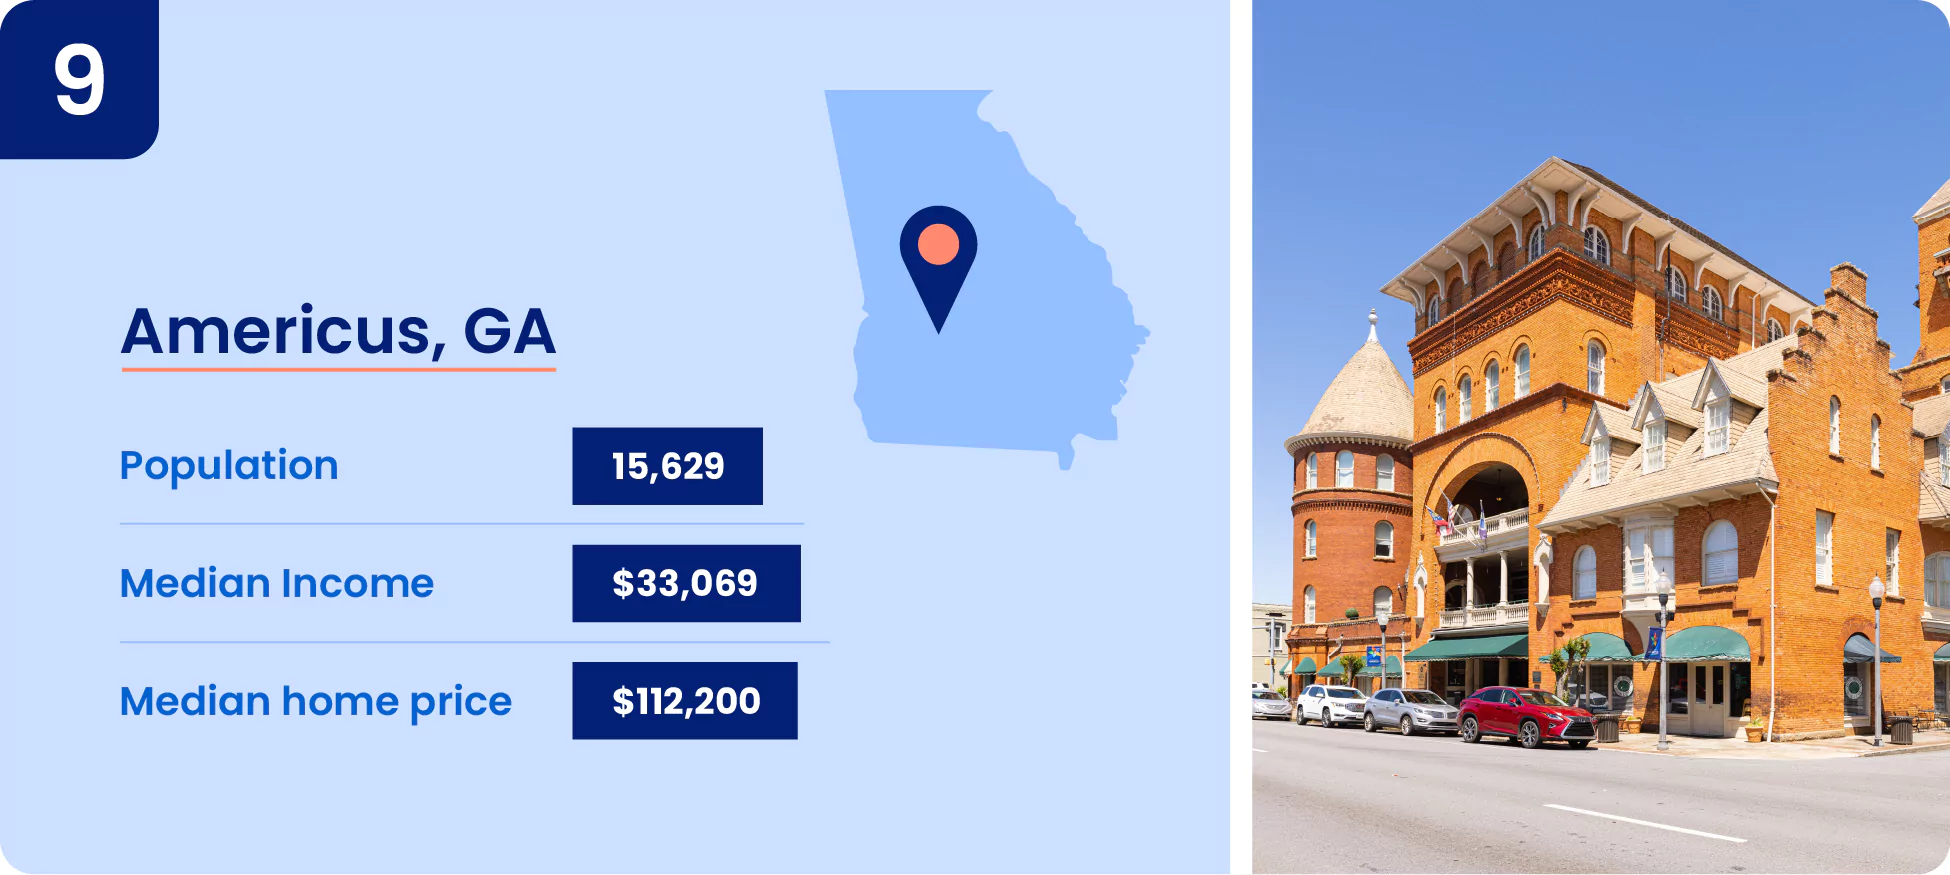 Image shows key information about one of the cheapest place to live in Georgia, the city of Americus.